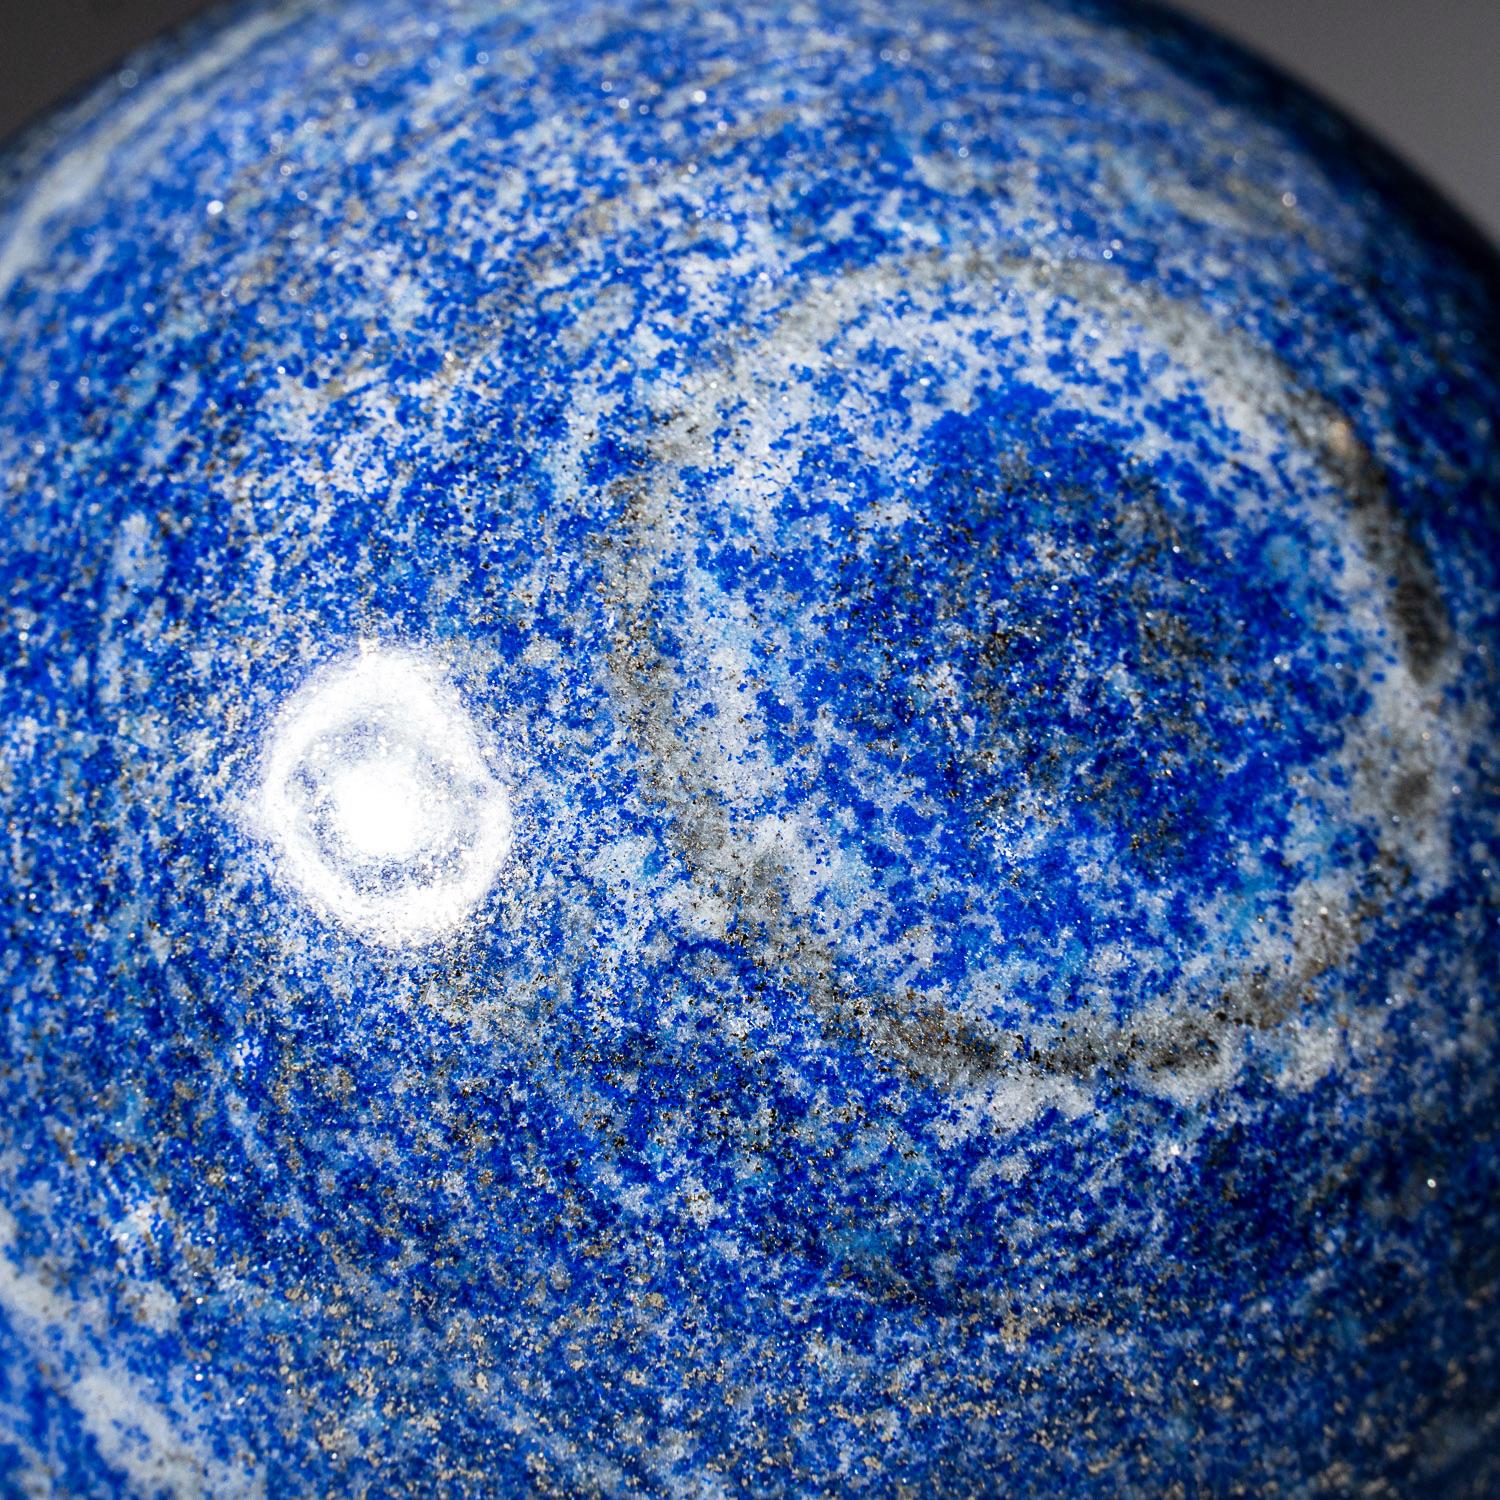 Contemporary Polished Lapis Lazuli Sphere from Afghanistan (4